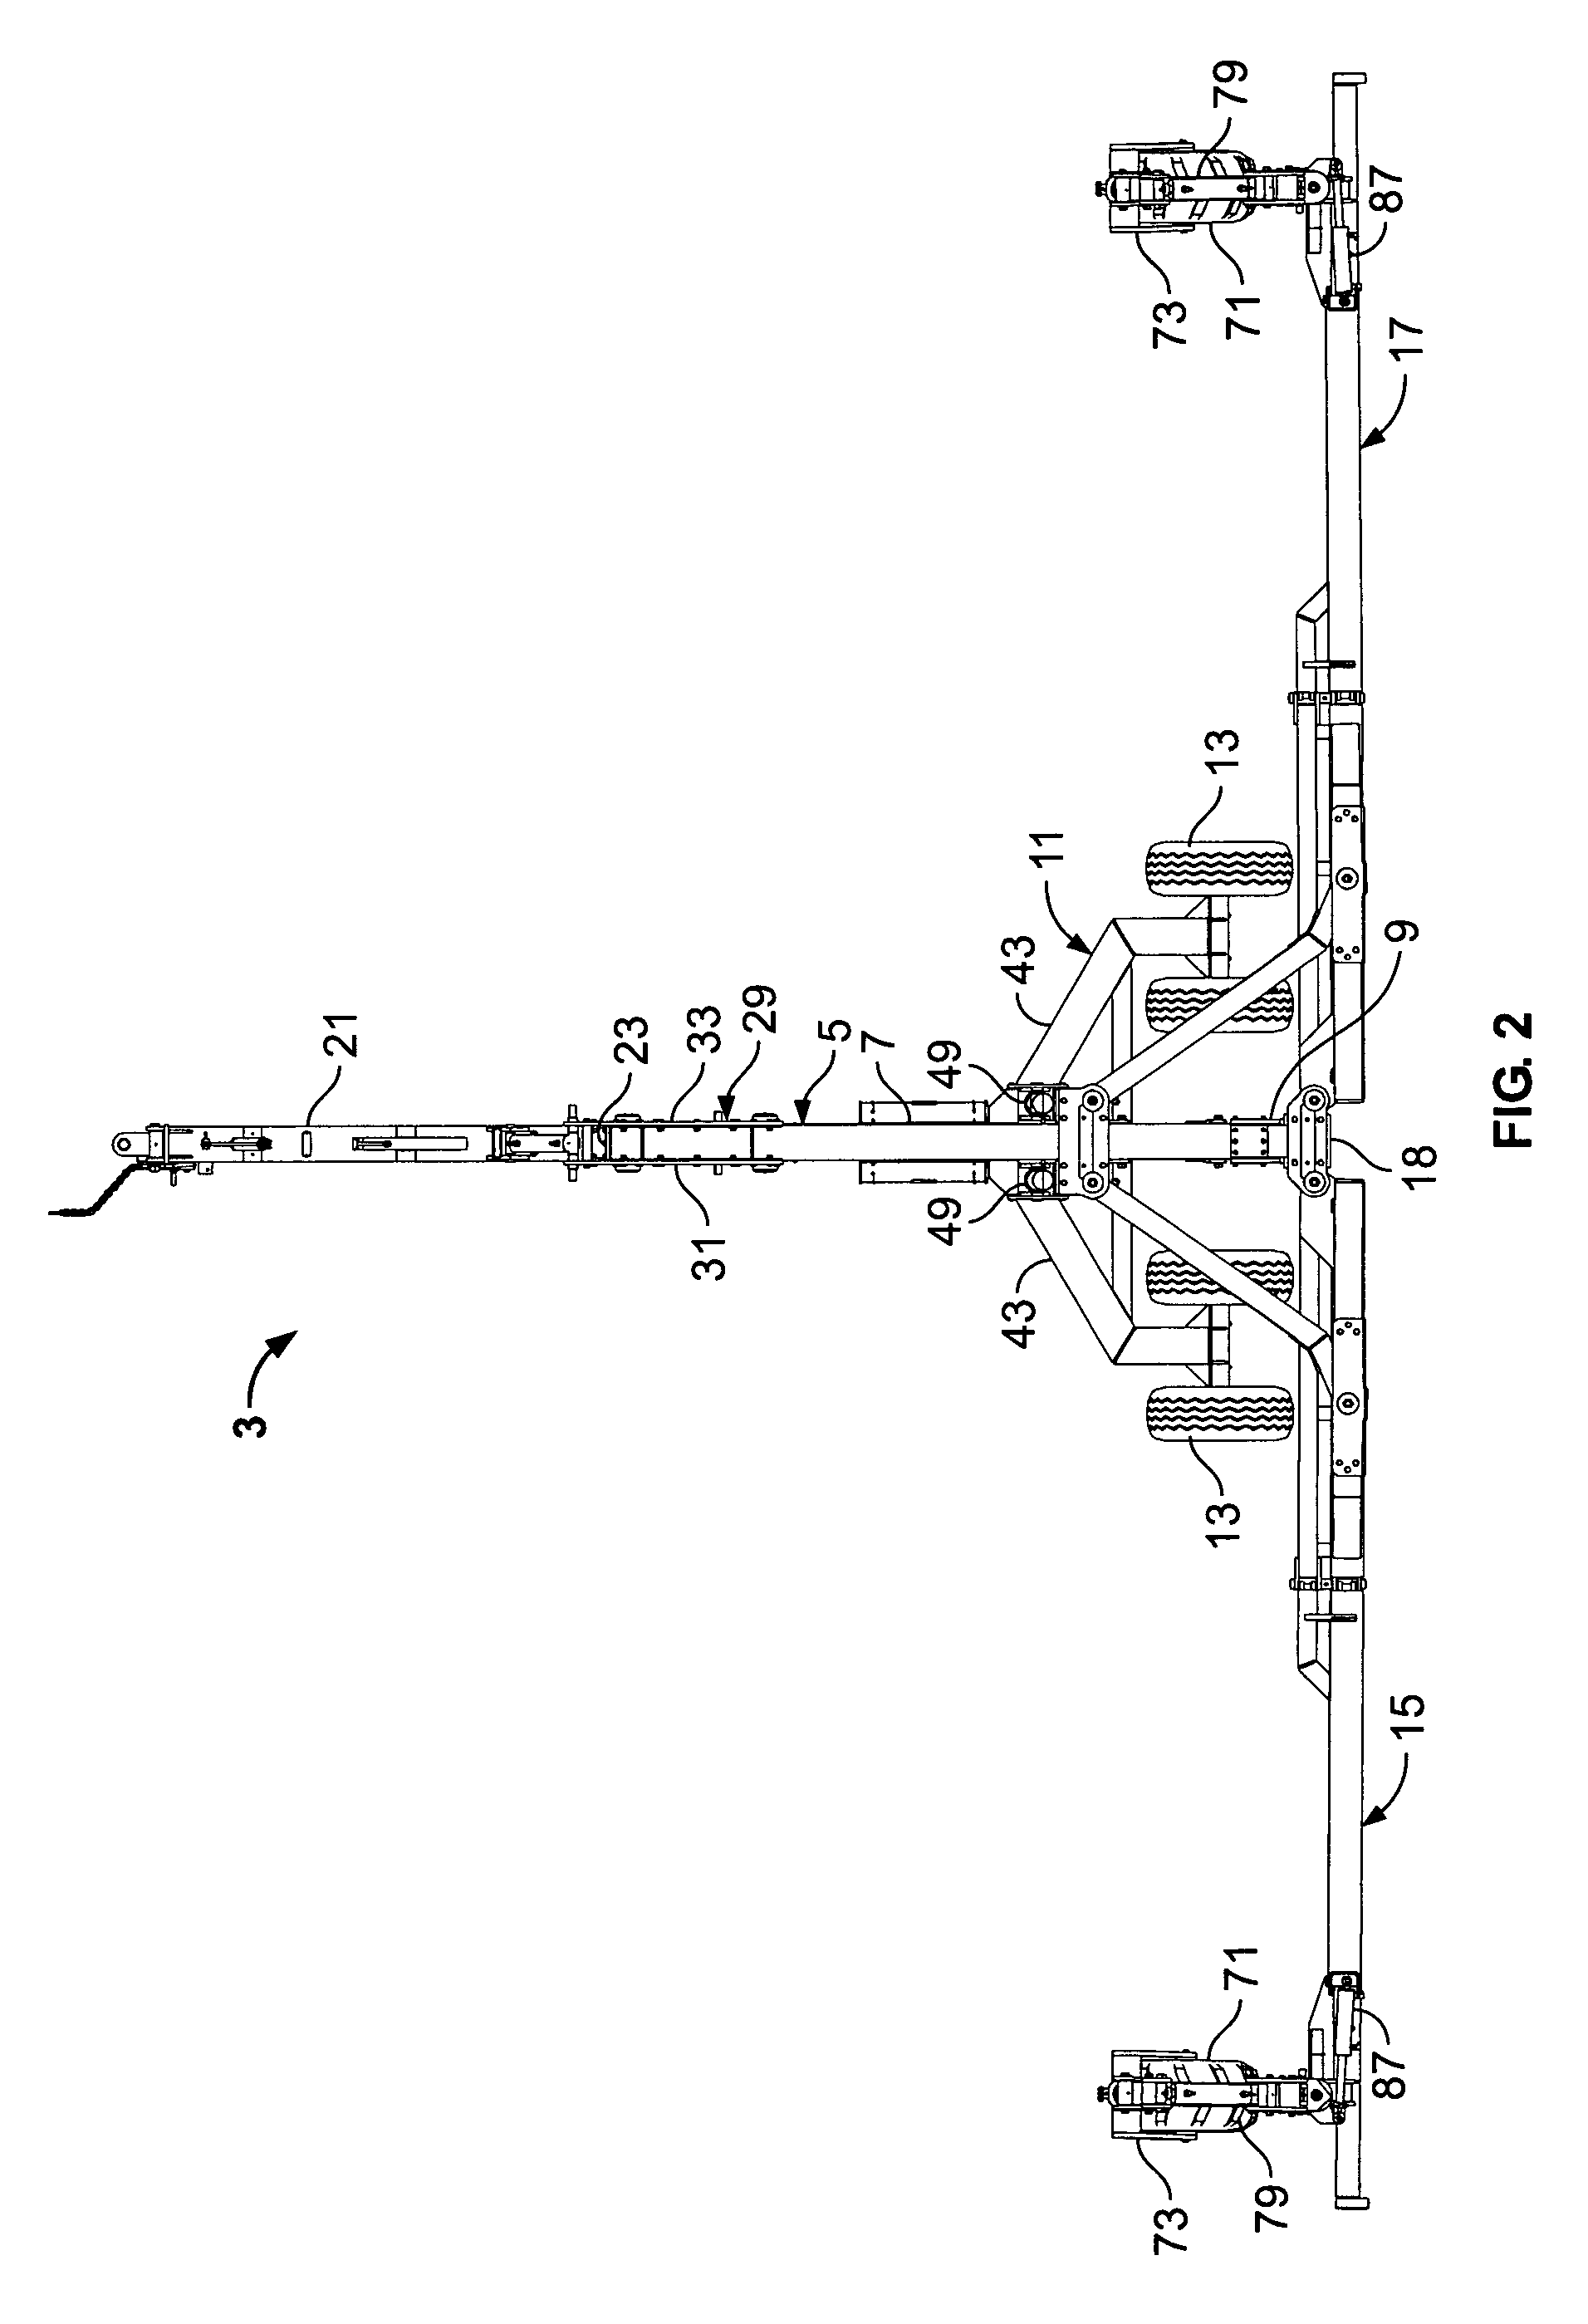 Front folding agricultural implement frame with rearwardly telescoping tongue